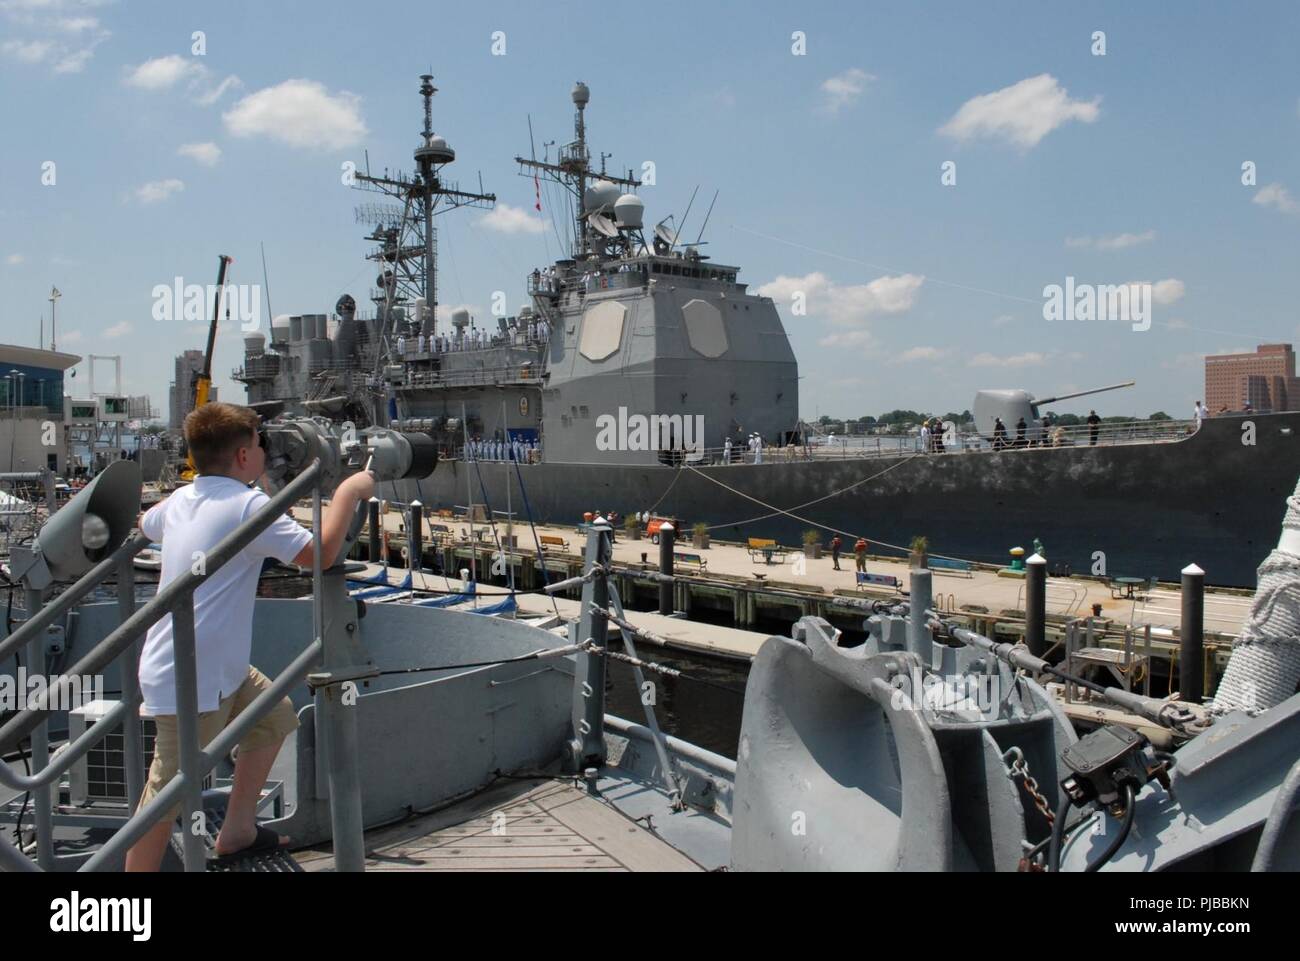 A visitor on-board the USS Wisconsin (BB-64) has a rare opportunity to watch the USS Monterey (CG-61) dock next to the museum ship. The Monterey will be docked behind the Hampton Roads Naval Museum and Nauticus at the Half-Moon cruise ship terminal through July 4, 2018. The Ship's crew will host free tours to the general public starting at 10am through 4pm on July 4, 2018.     The Hampton Roads Naval Museum is one of ten Navy museums that are operated by the Naval History & Heritage Command. It celebrates the long history of the U.S. Navy in the Hampton Roads region of Virginia and is co-locat Stock Photo